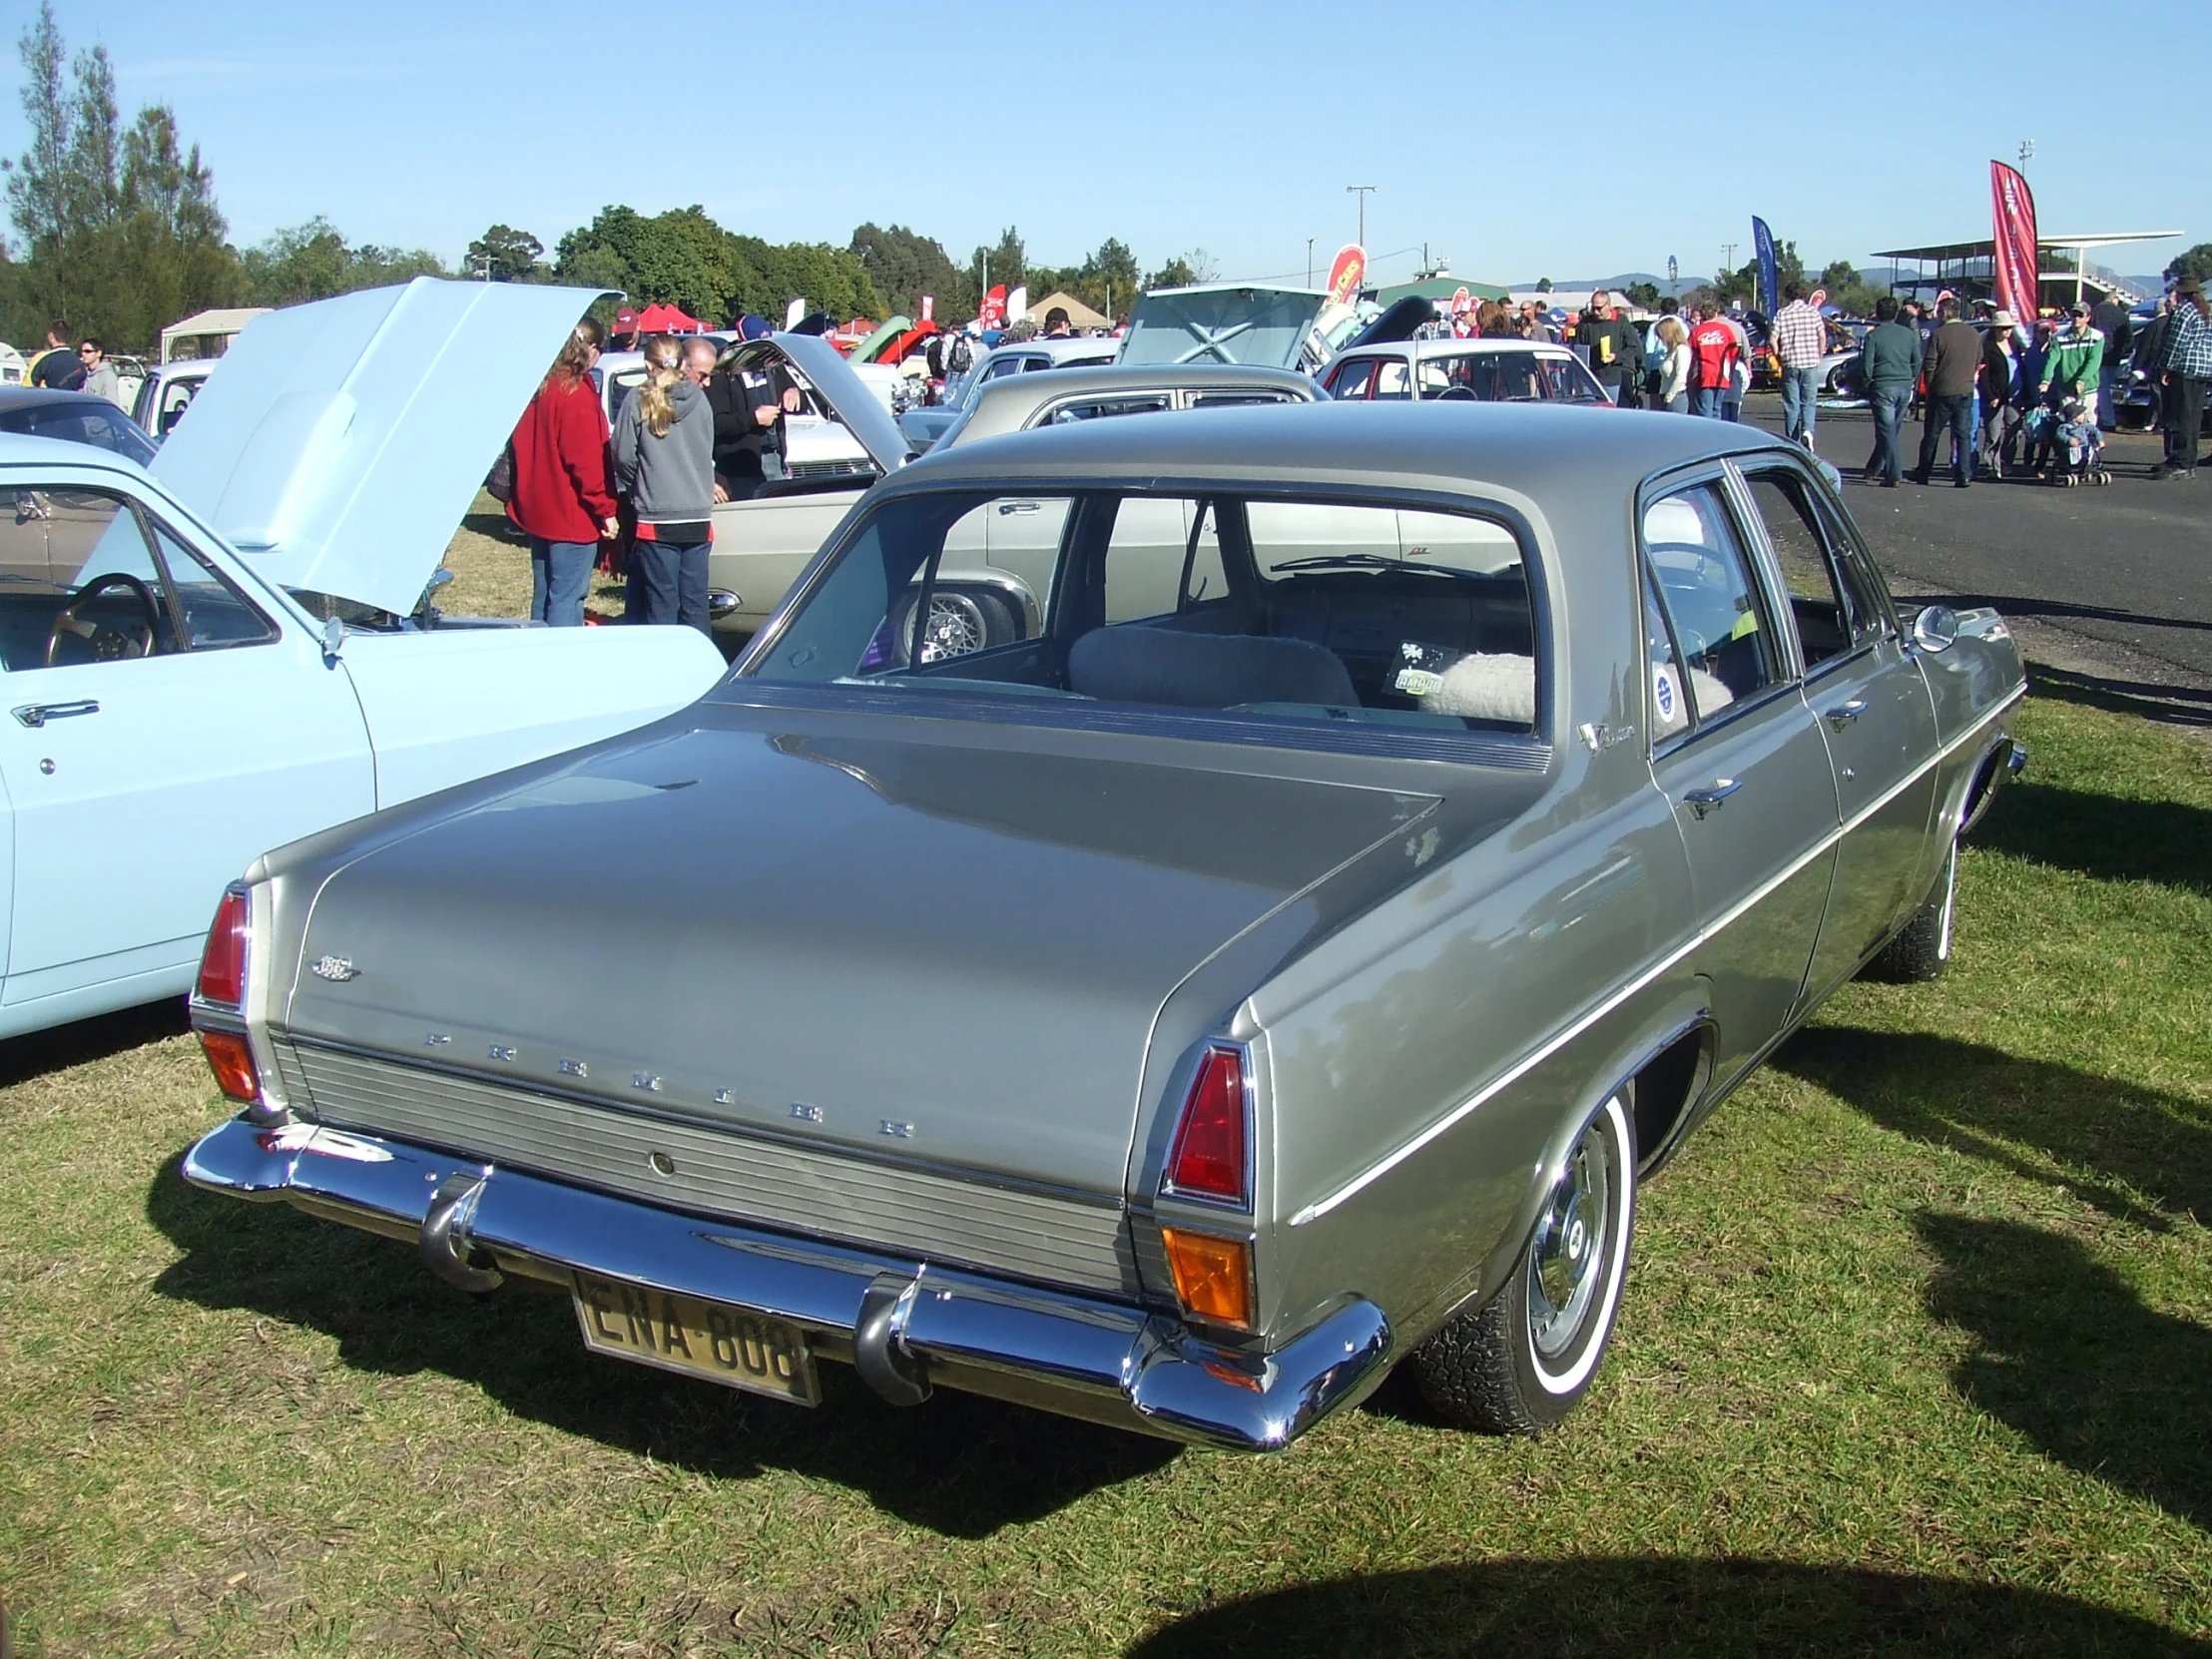 several vintage cars in a grassy area at an event